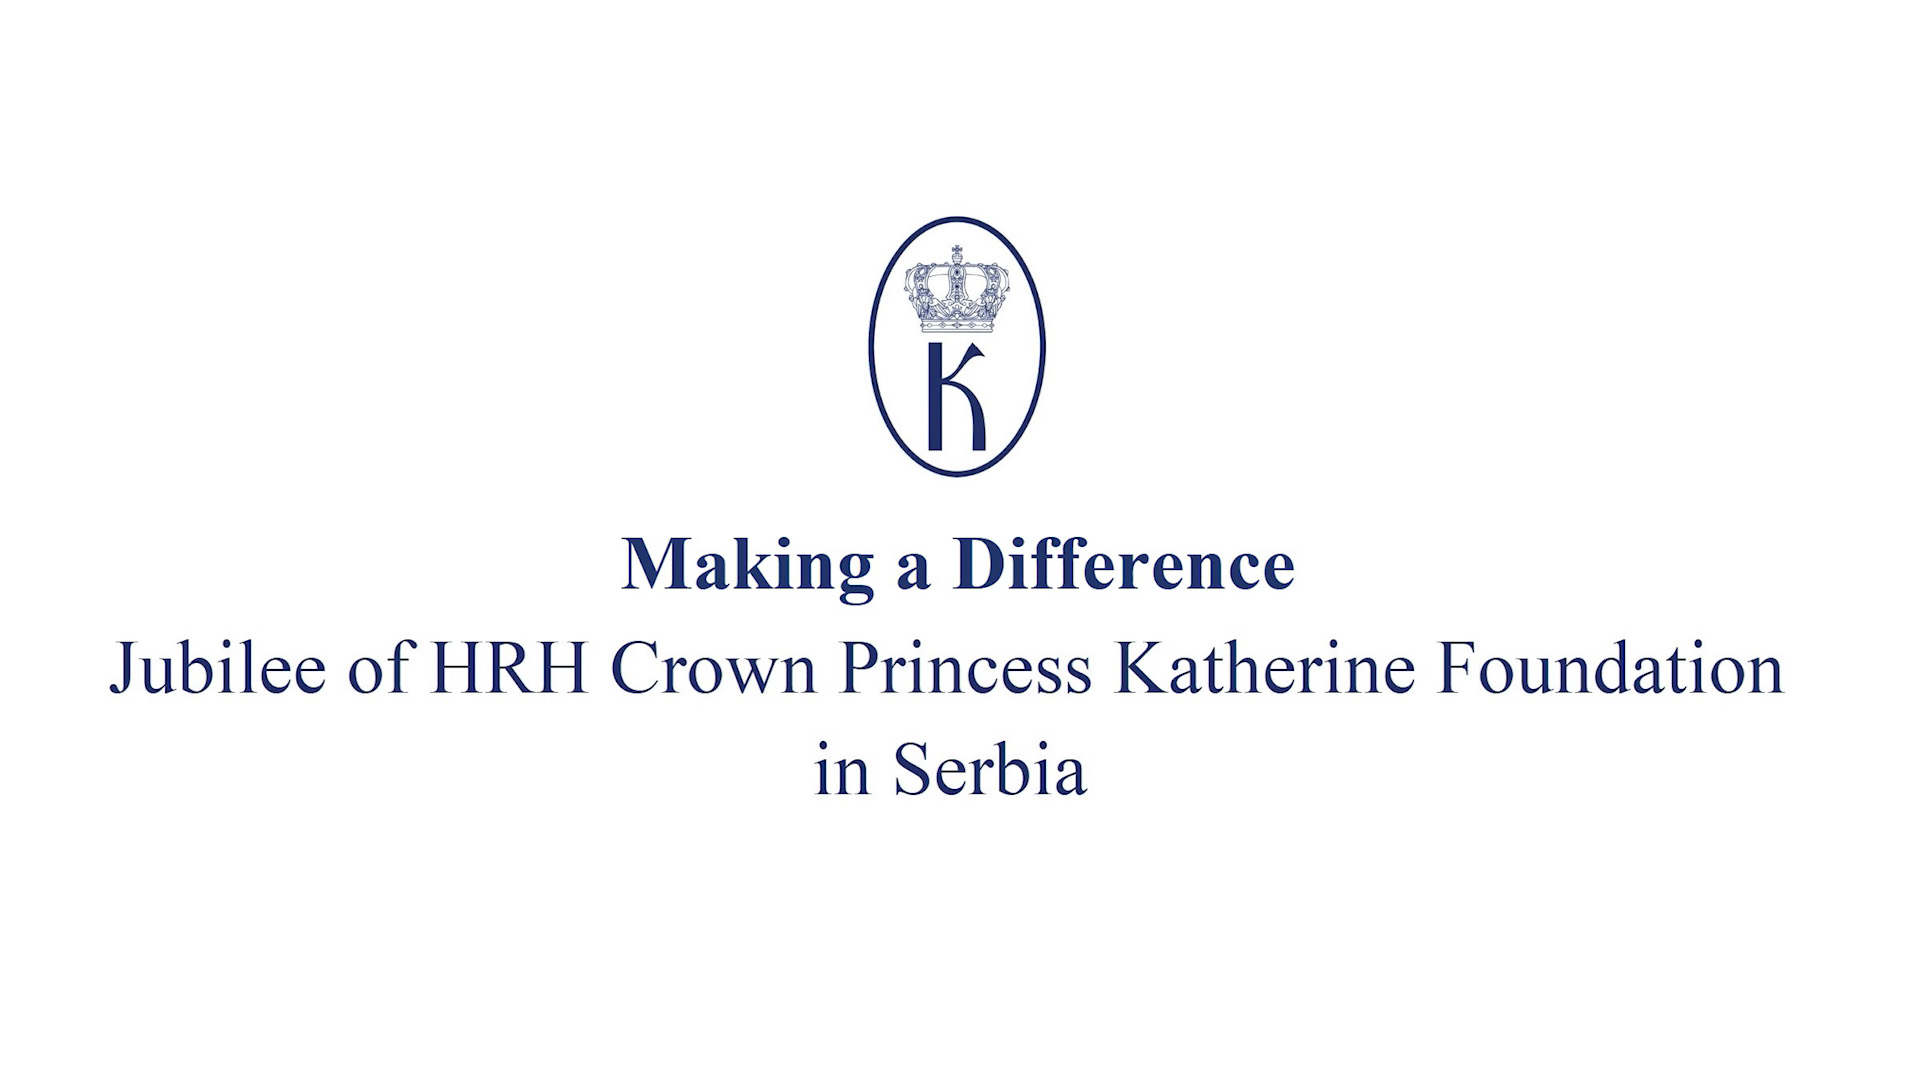 "MAKING A DIFFERENCE" – JUBILEE OF CROWN PRINCESS KATHERINE FOUNDATION IN SERBIA